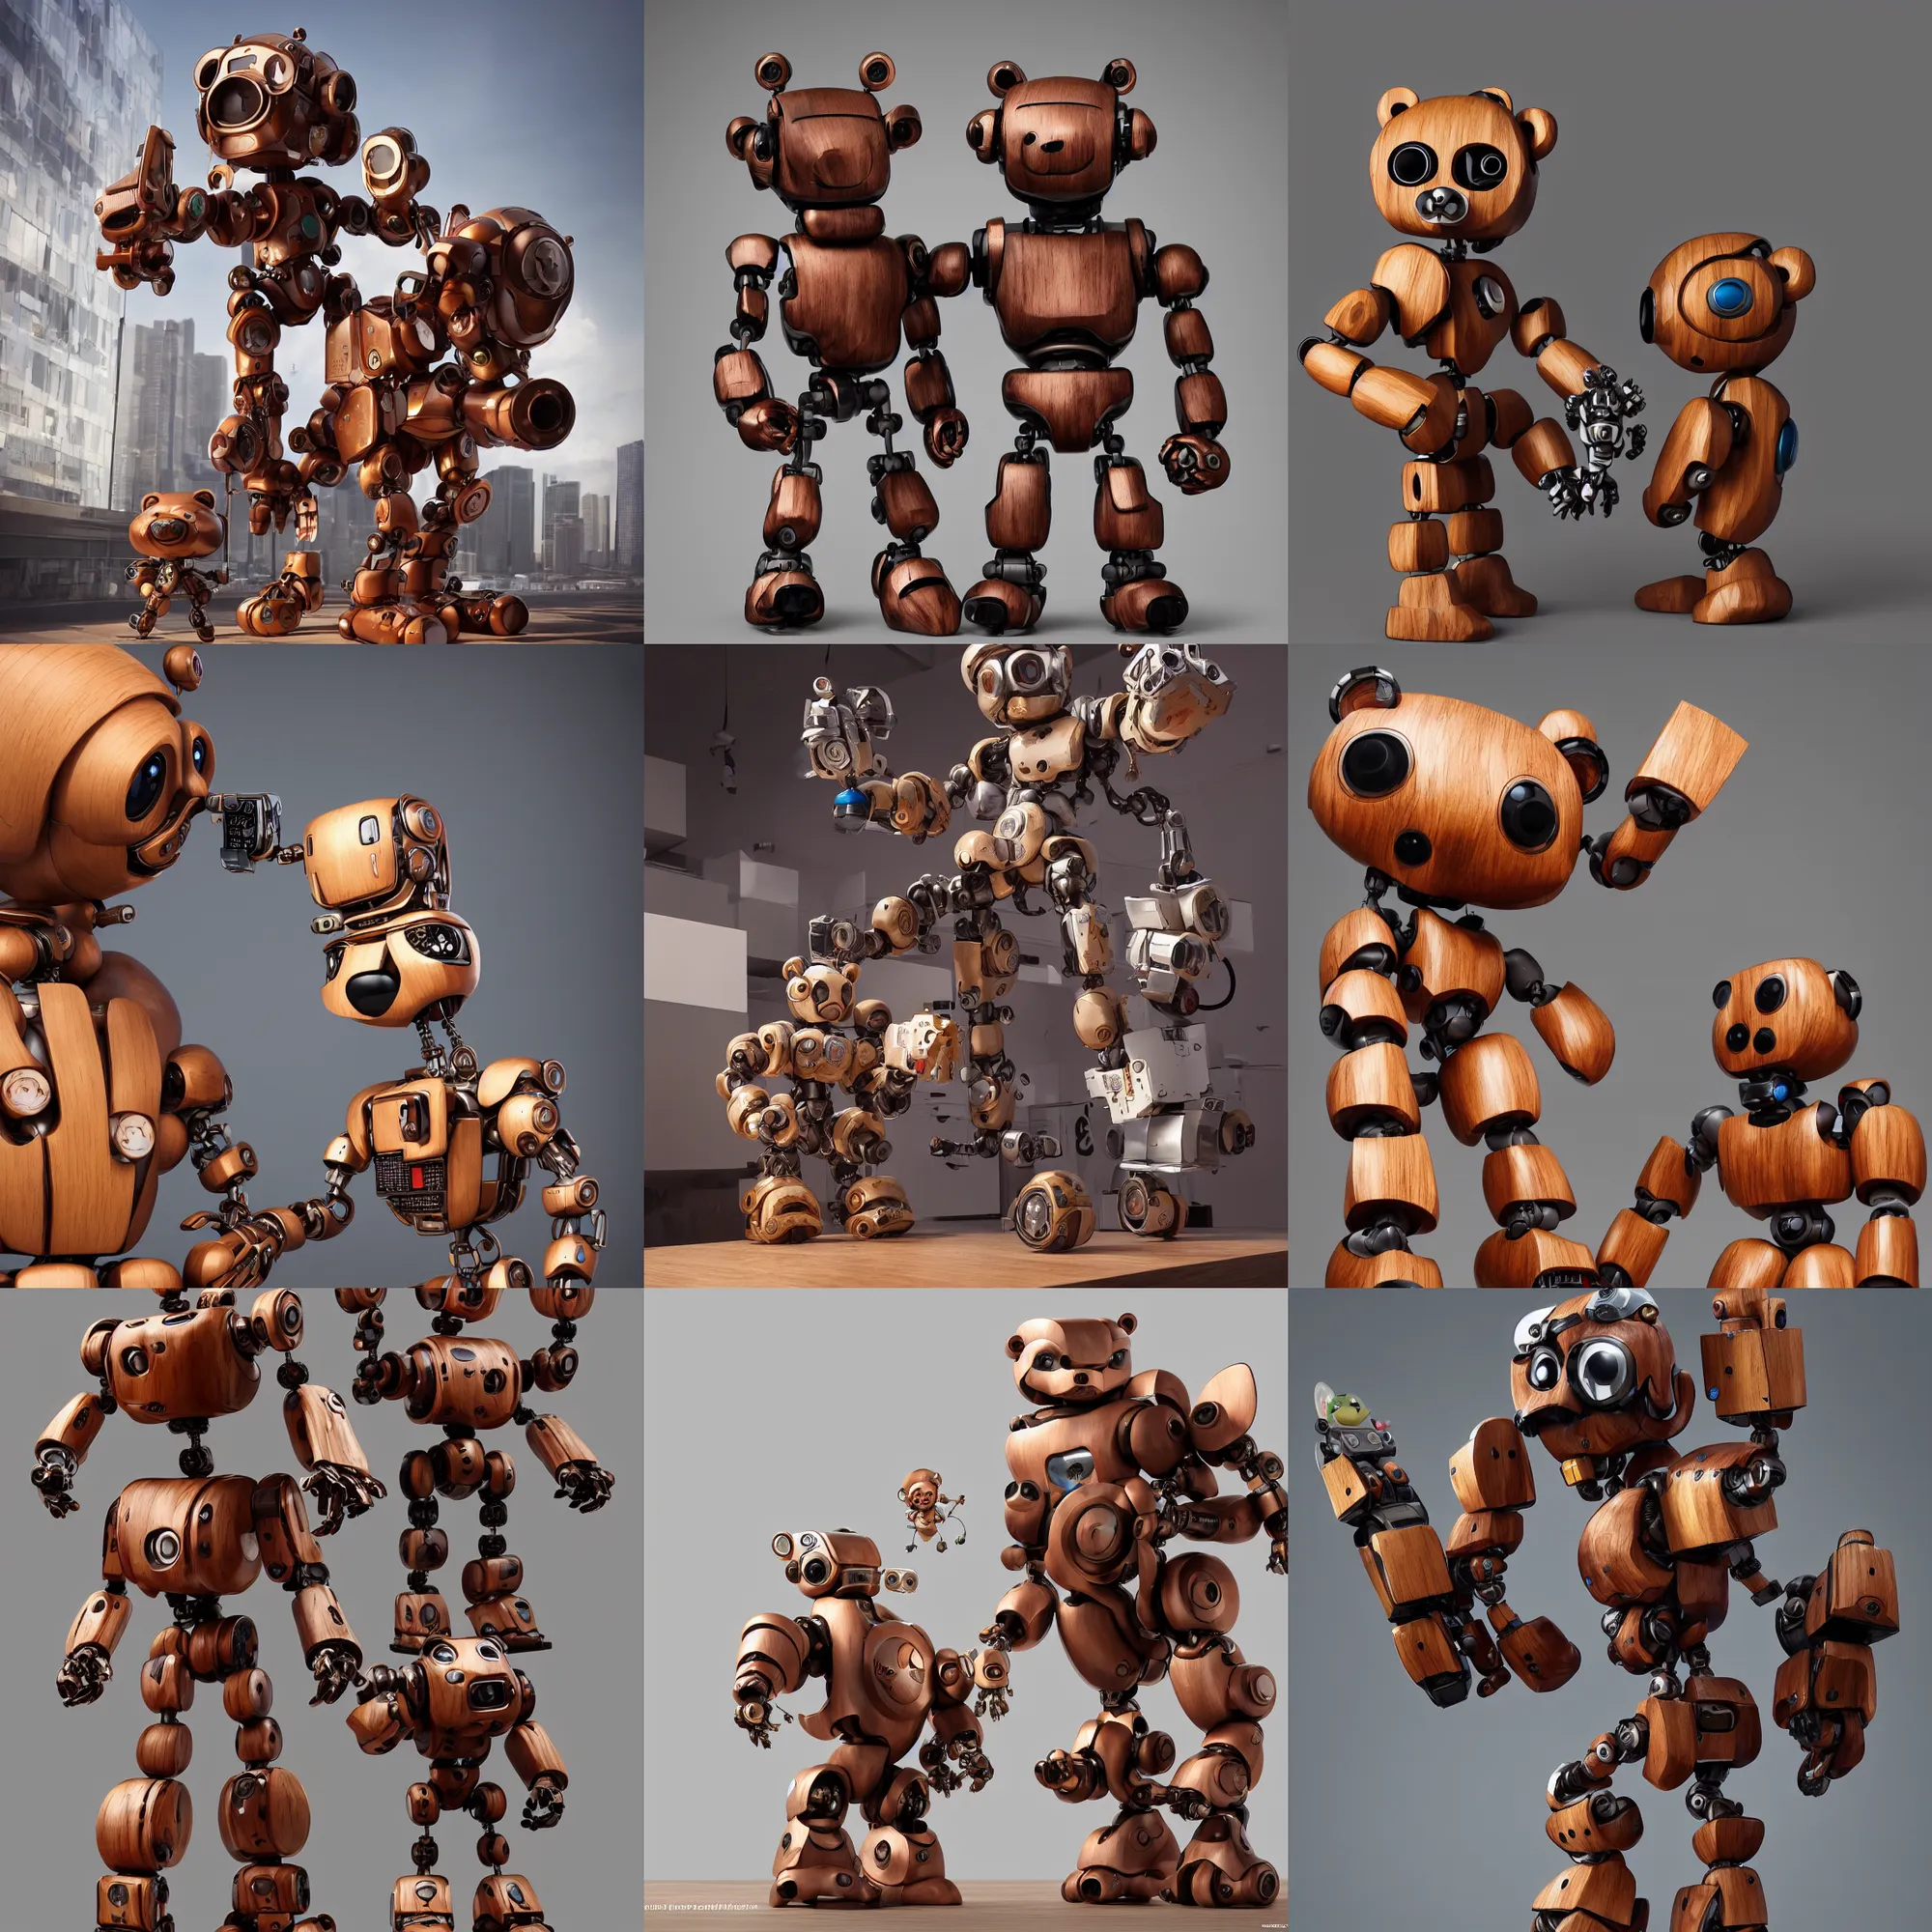 Prompt: 8 k octane render sculpture photorealistic beautiful character wooden design, art toys collectible figurine, mascot very cute bear robot cyberpunk, contemporary art gallery in background concept art cgsociety by ron english